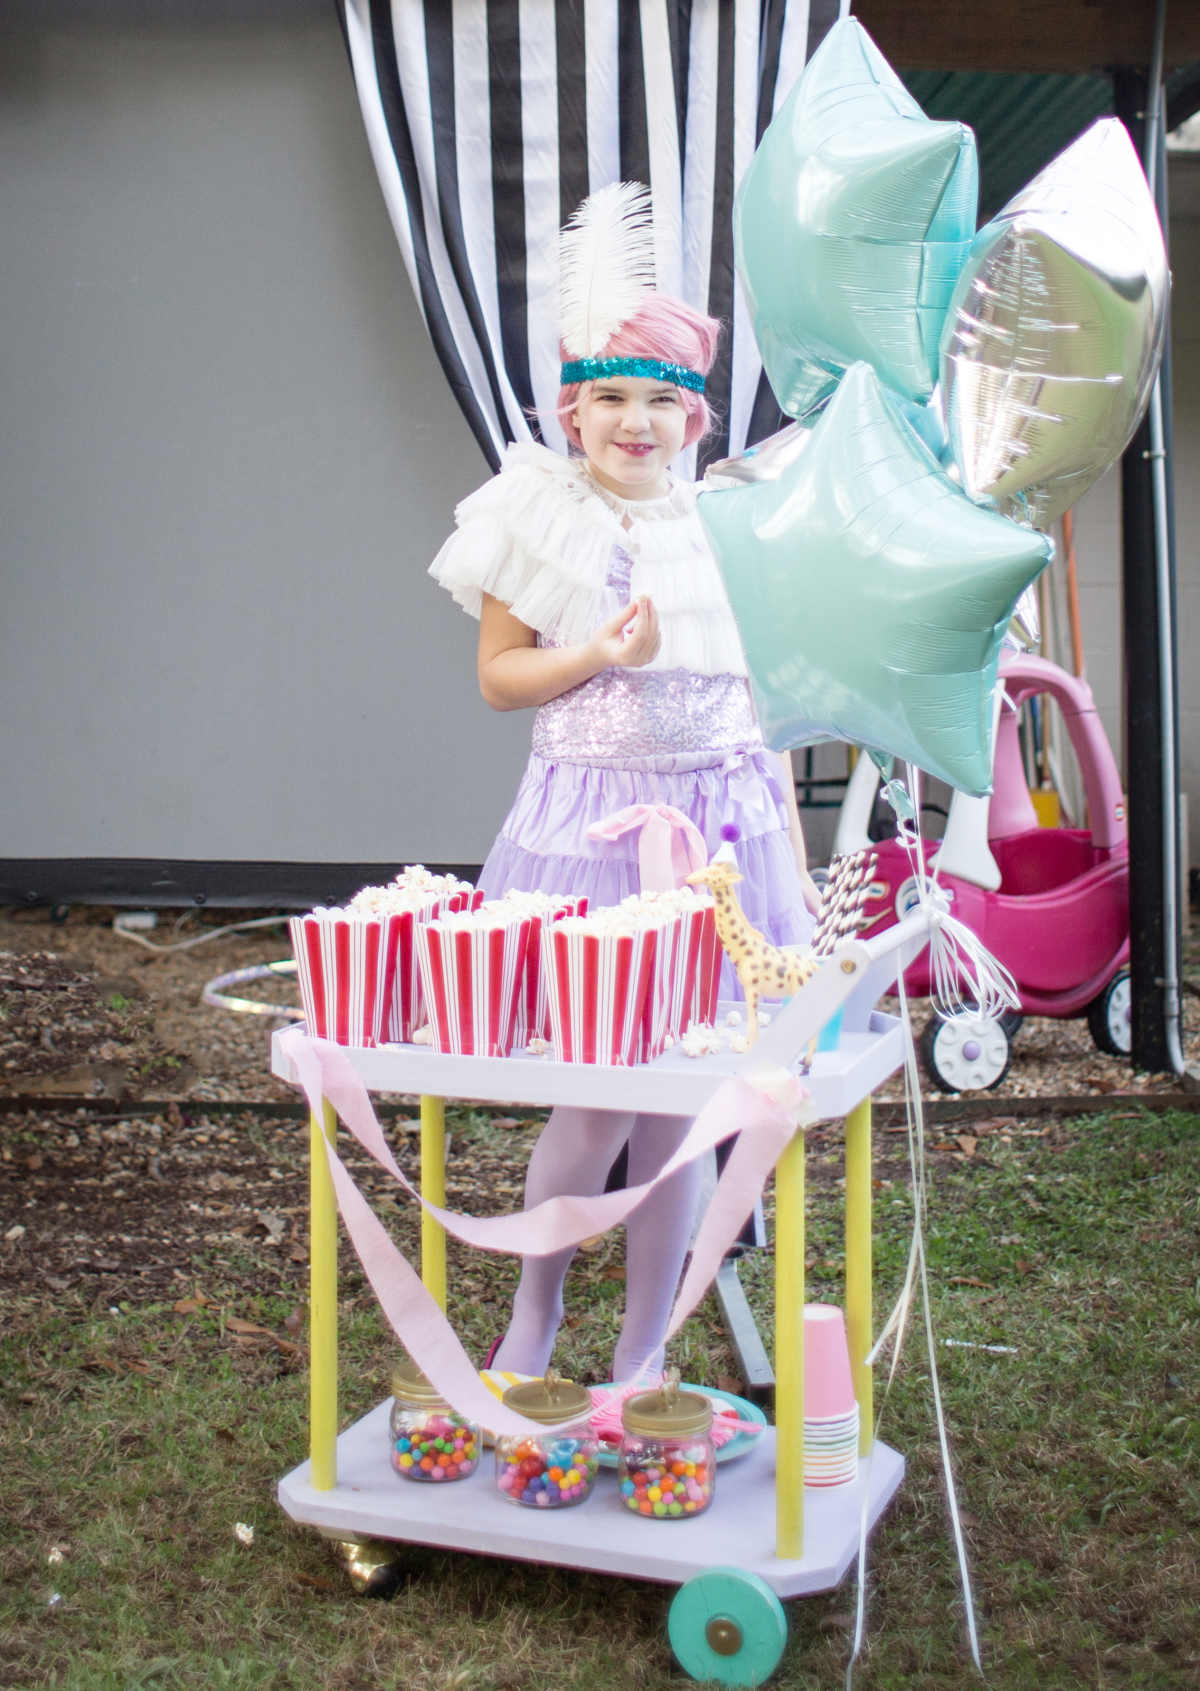 A Greatest Showman Inspired Birthday Party - Lay Baby Lay